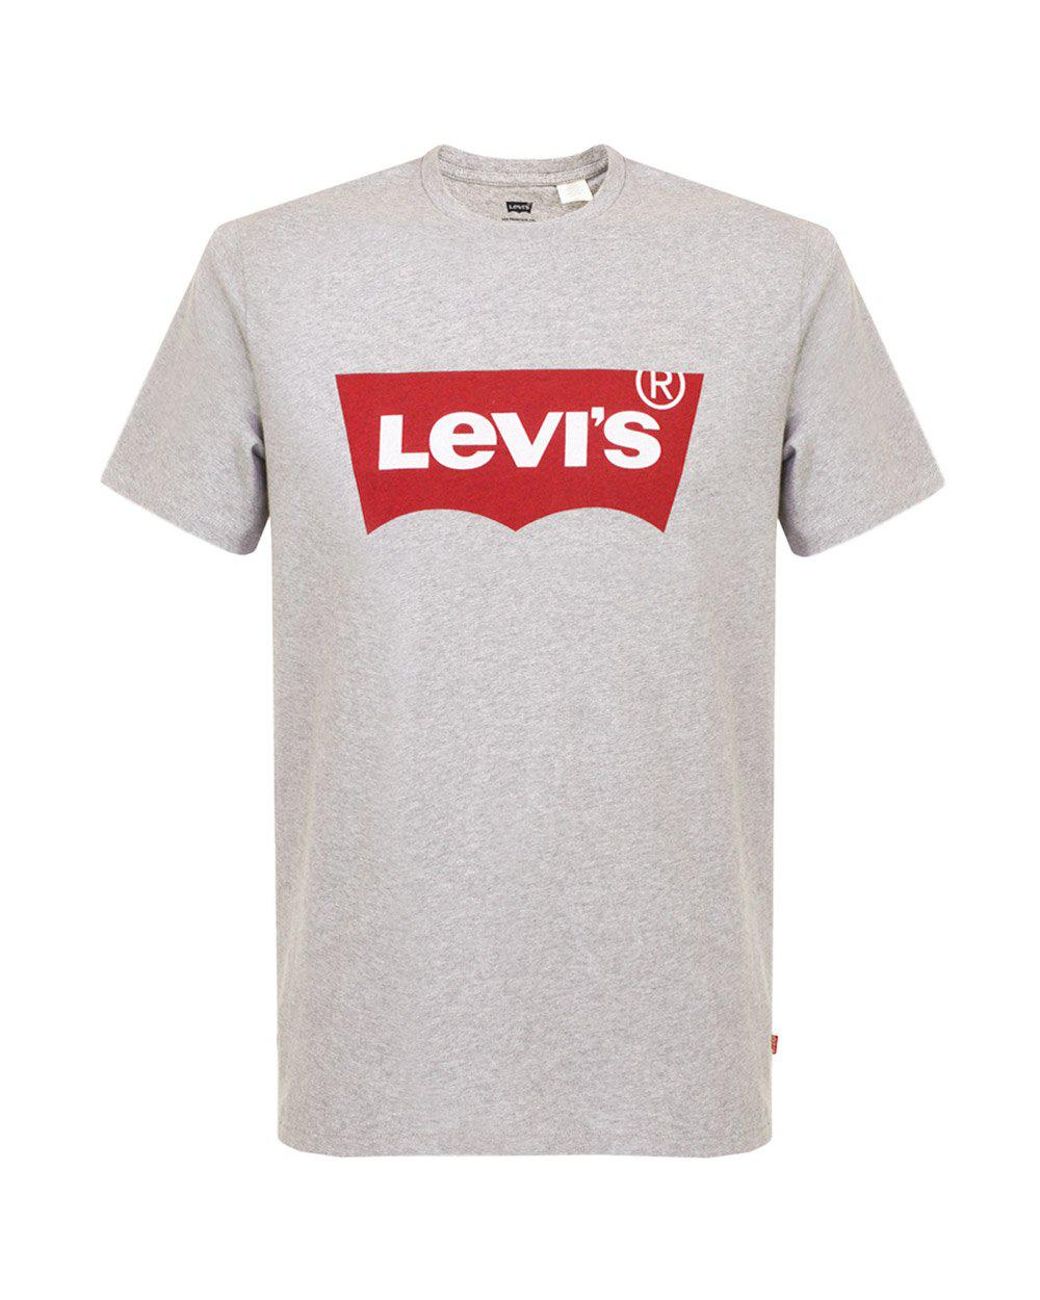 Lyst - Levi'S Levi'S Batwing Grey T-Shirt 17783-0138 in Gray for Men